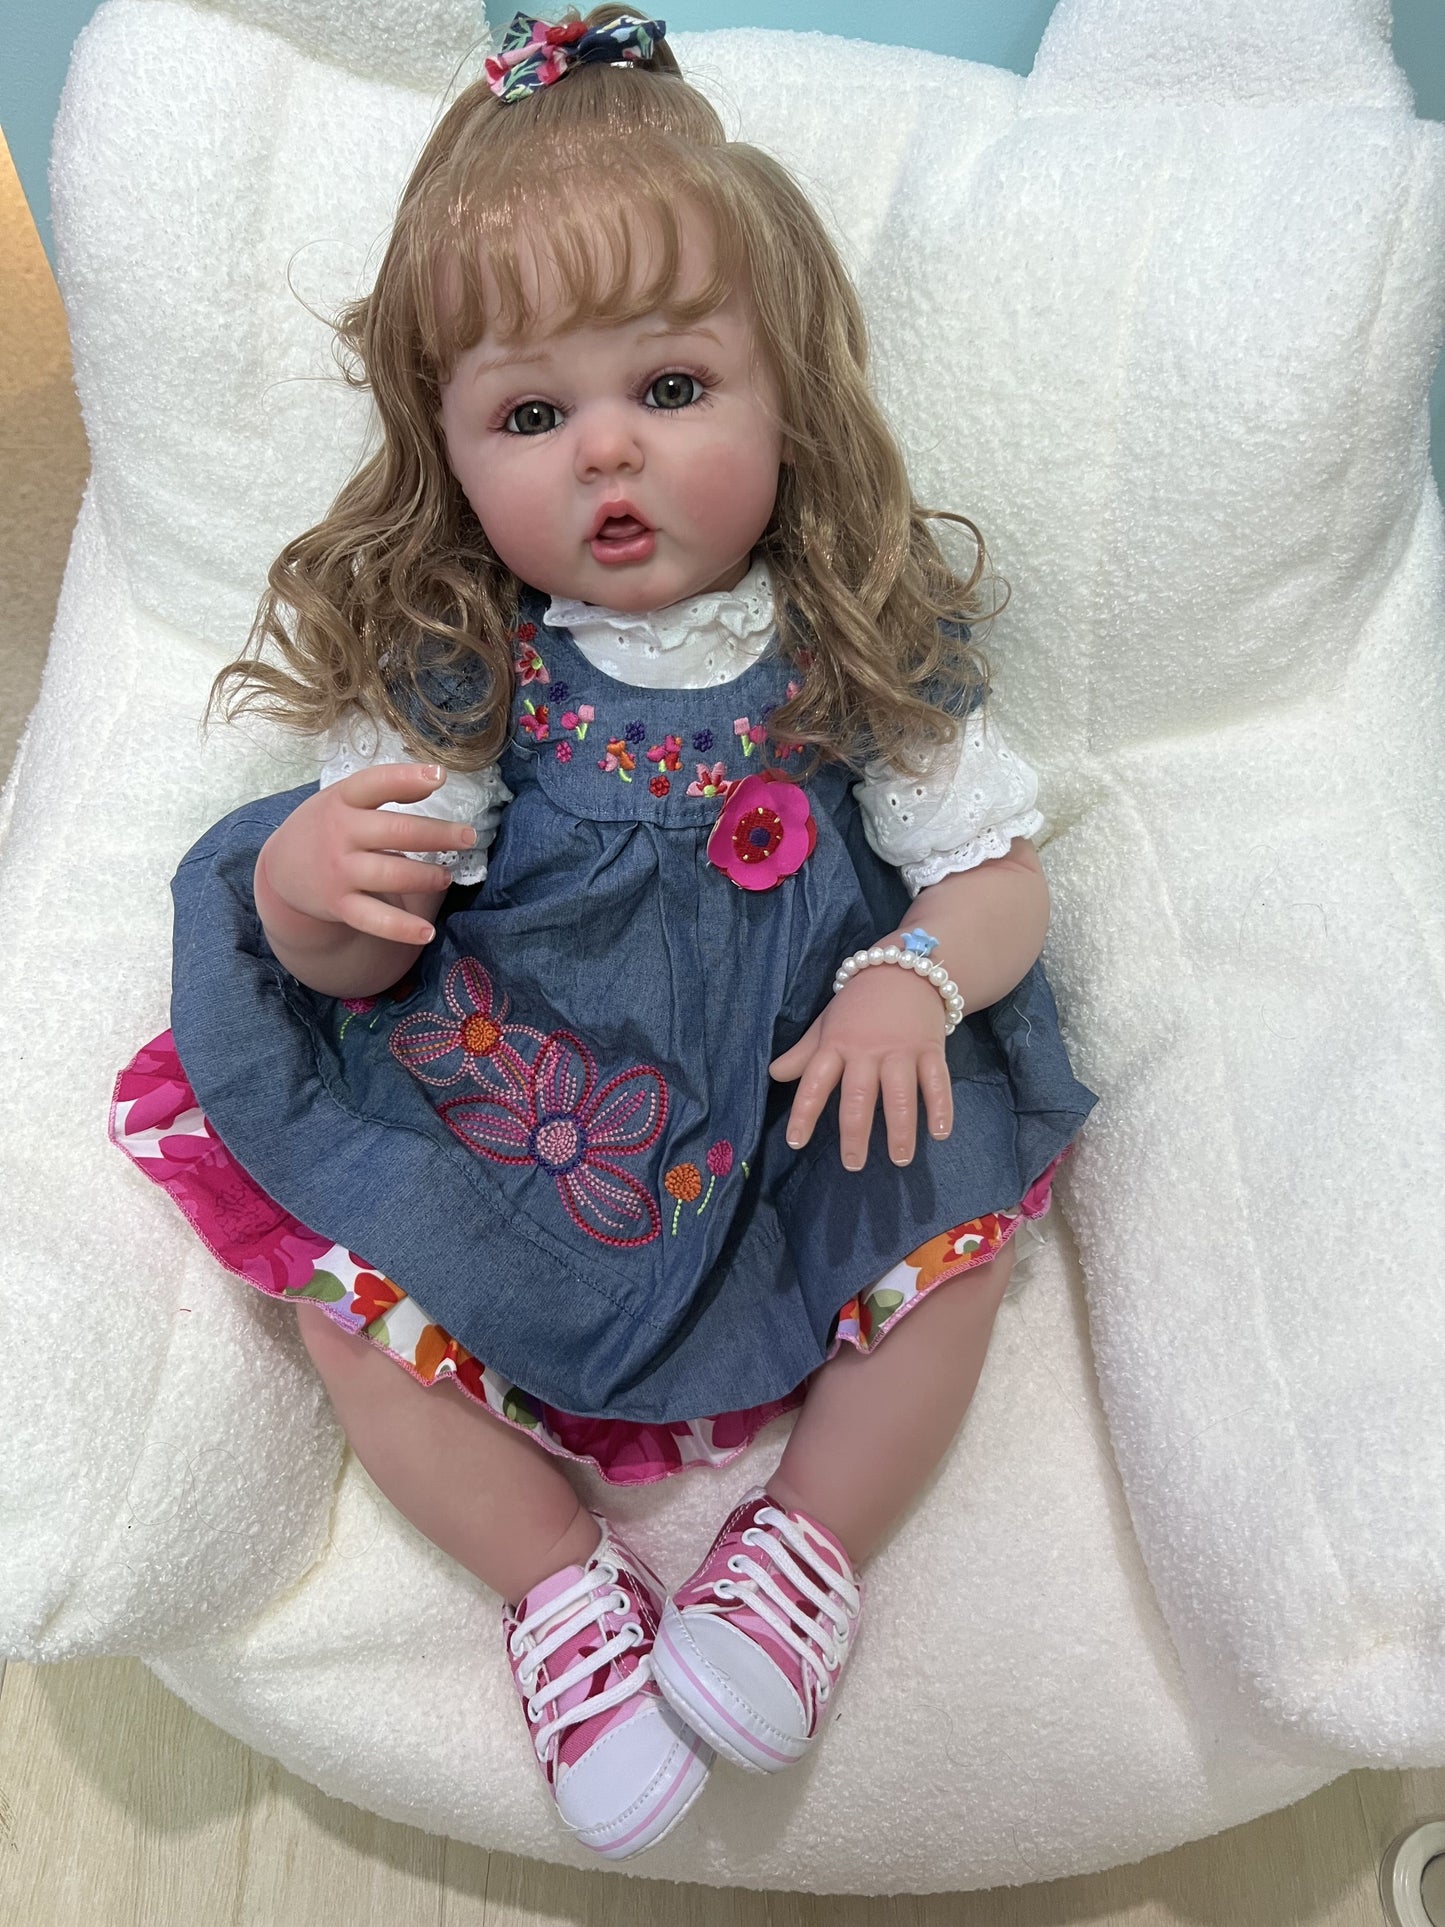 Lovely Long Curly Hair Toddler Princess Girl Lifelike Reborn Baby Dolls That Look Real Silicone Visible Veins 60CM 24 Inch Weighted Soft Cloth Realistic Baby Doll Collectible Art Doll